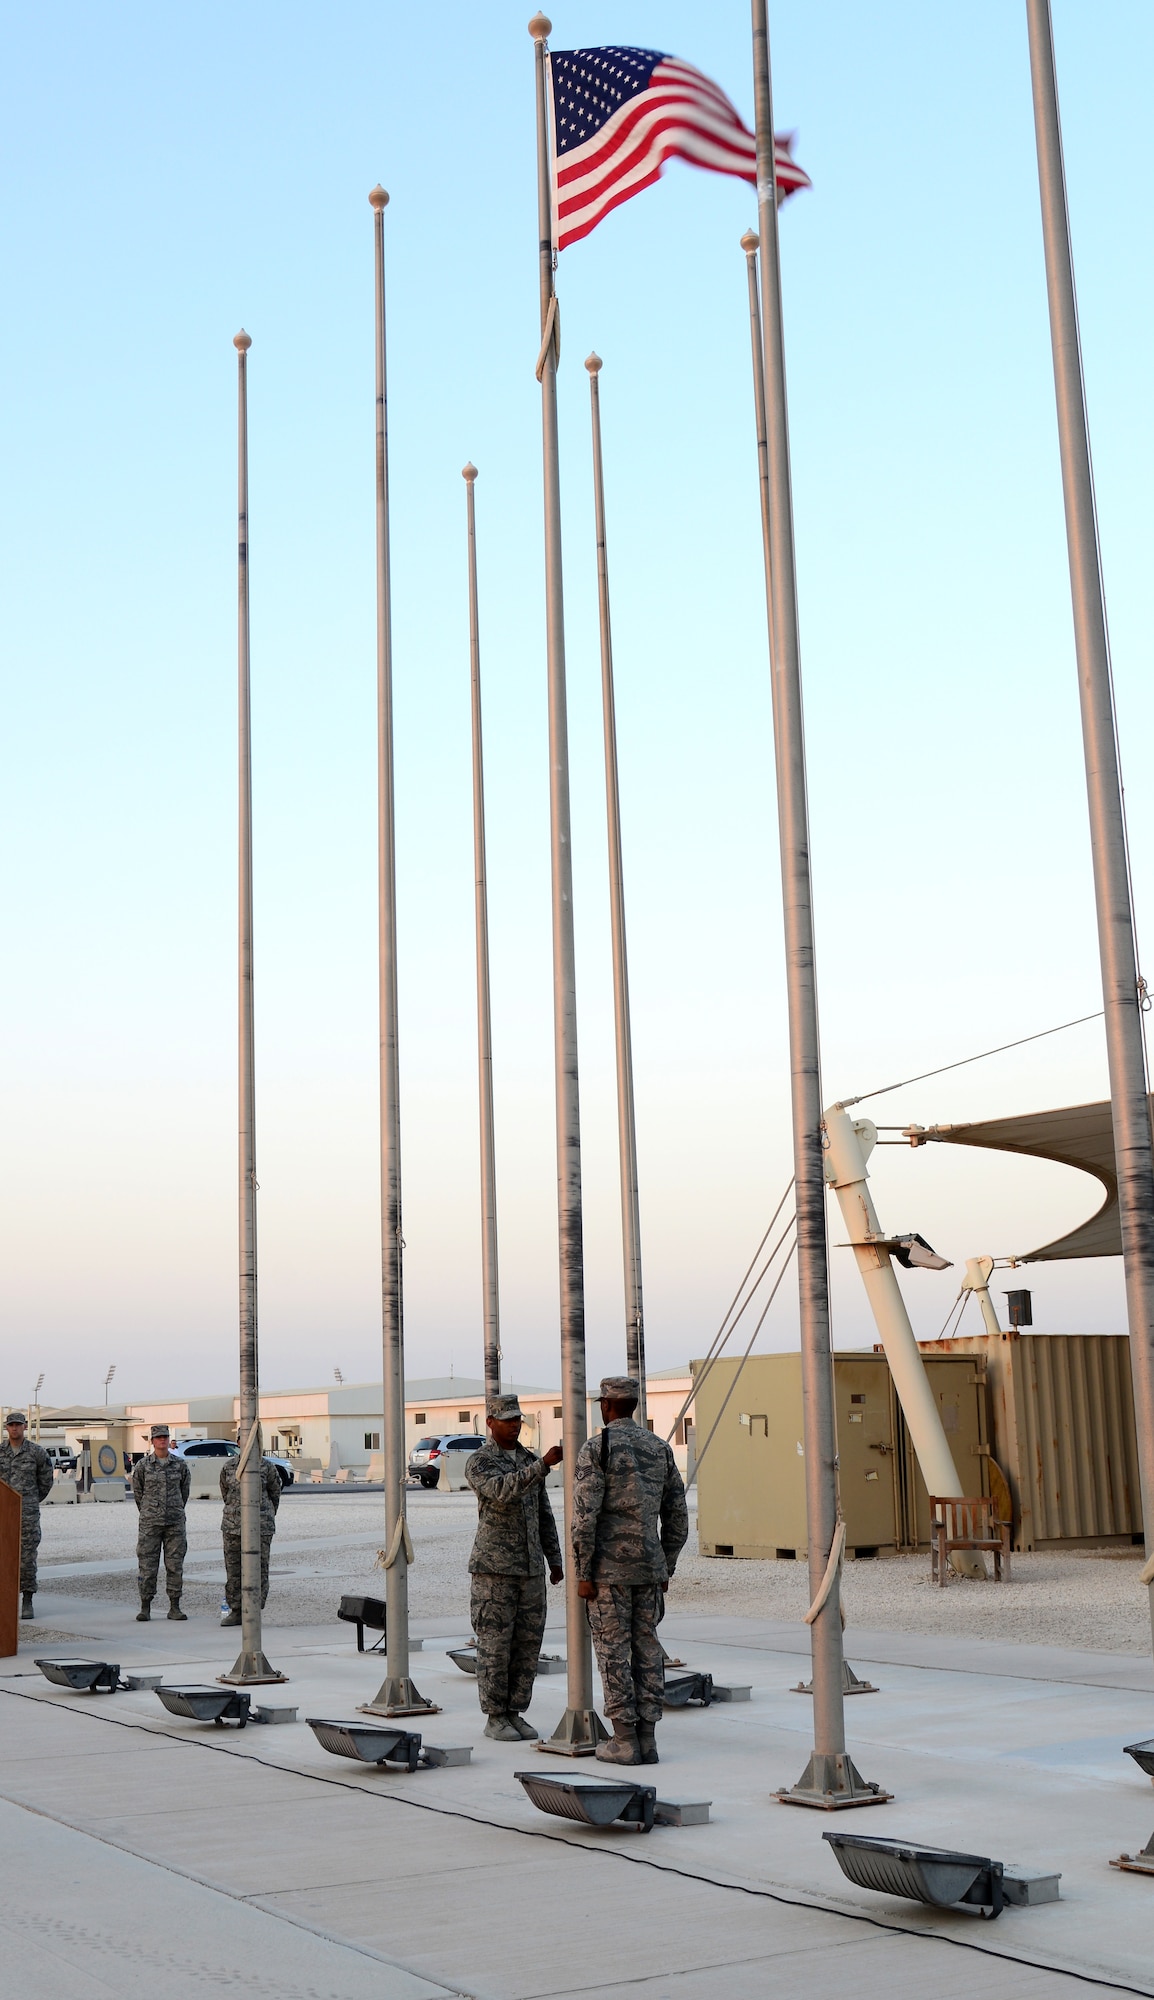 U.S.  Air Force Airmen from the 379th Air Expeditionary Wing Honor Guard lower the American flag during a retreat ceremony, Nov. 11, 2014, at Al Udeid Air Base, Qatar. During the retreat ceremony, Brig. Gen. Darren Hartford, 379th Air Expeditionary Wing commander, thanked coalition partners for attending the retreat and other remembrance events throughout the day and also thanked them for their service. (U.S. Air Force photo by Senior Airman Kia Atkins)